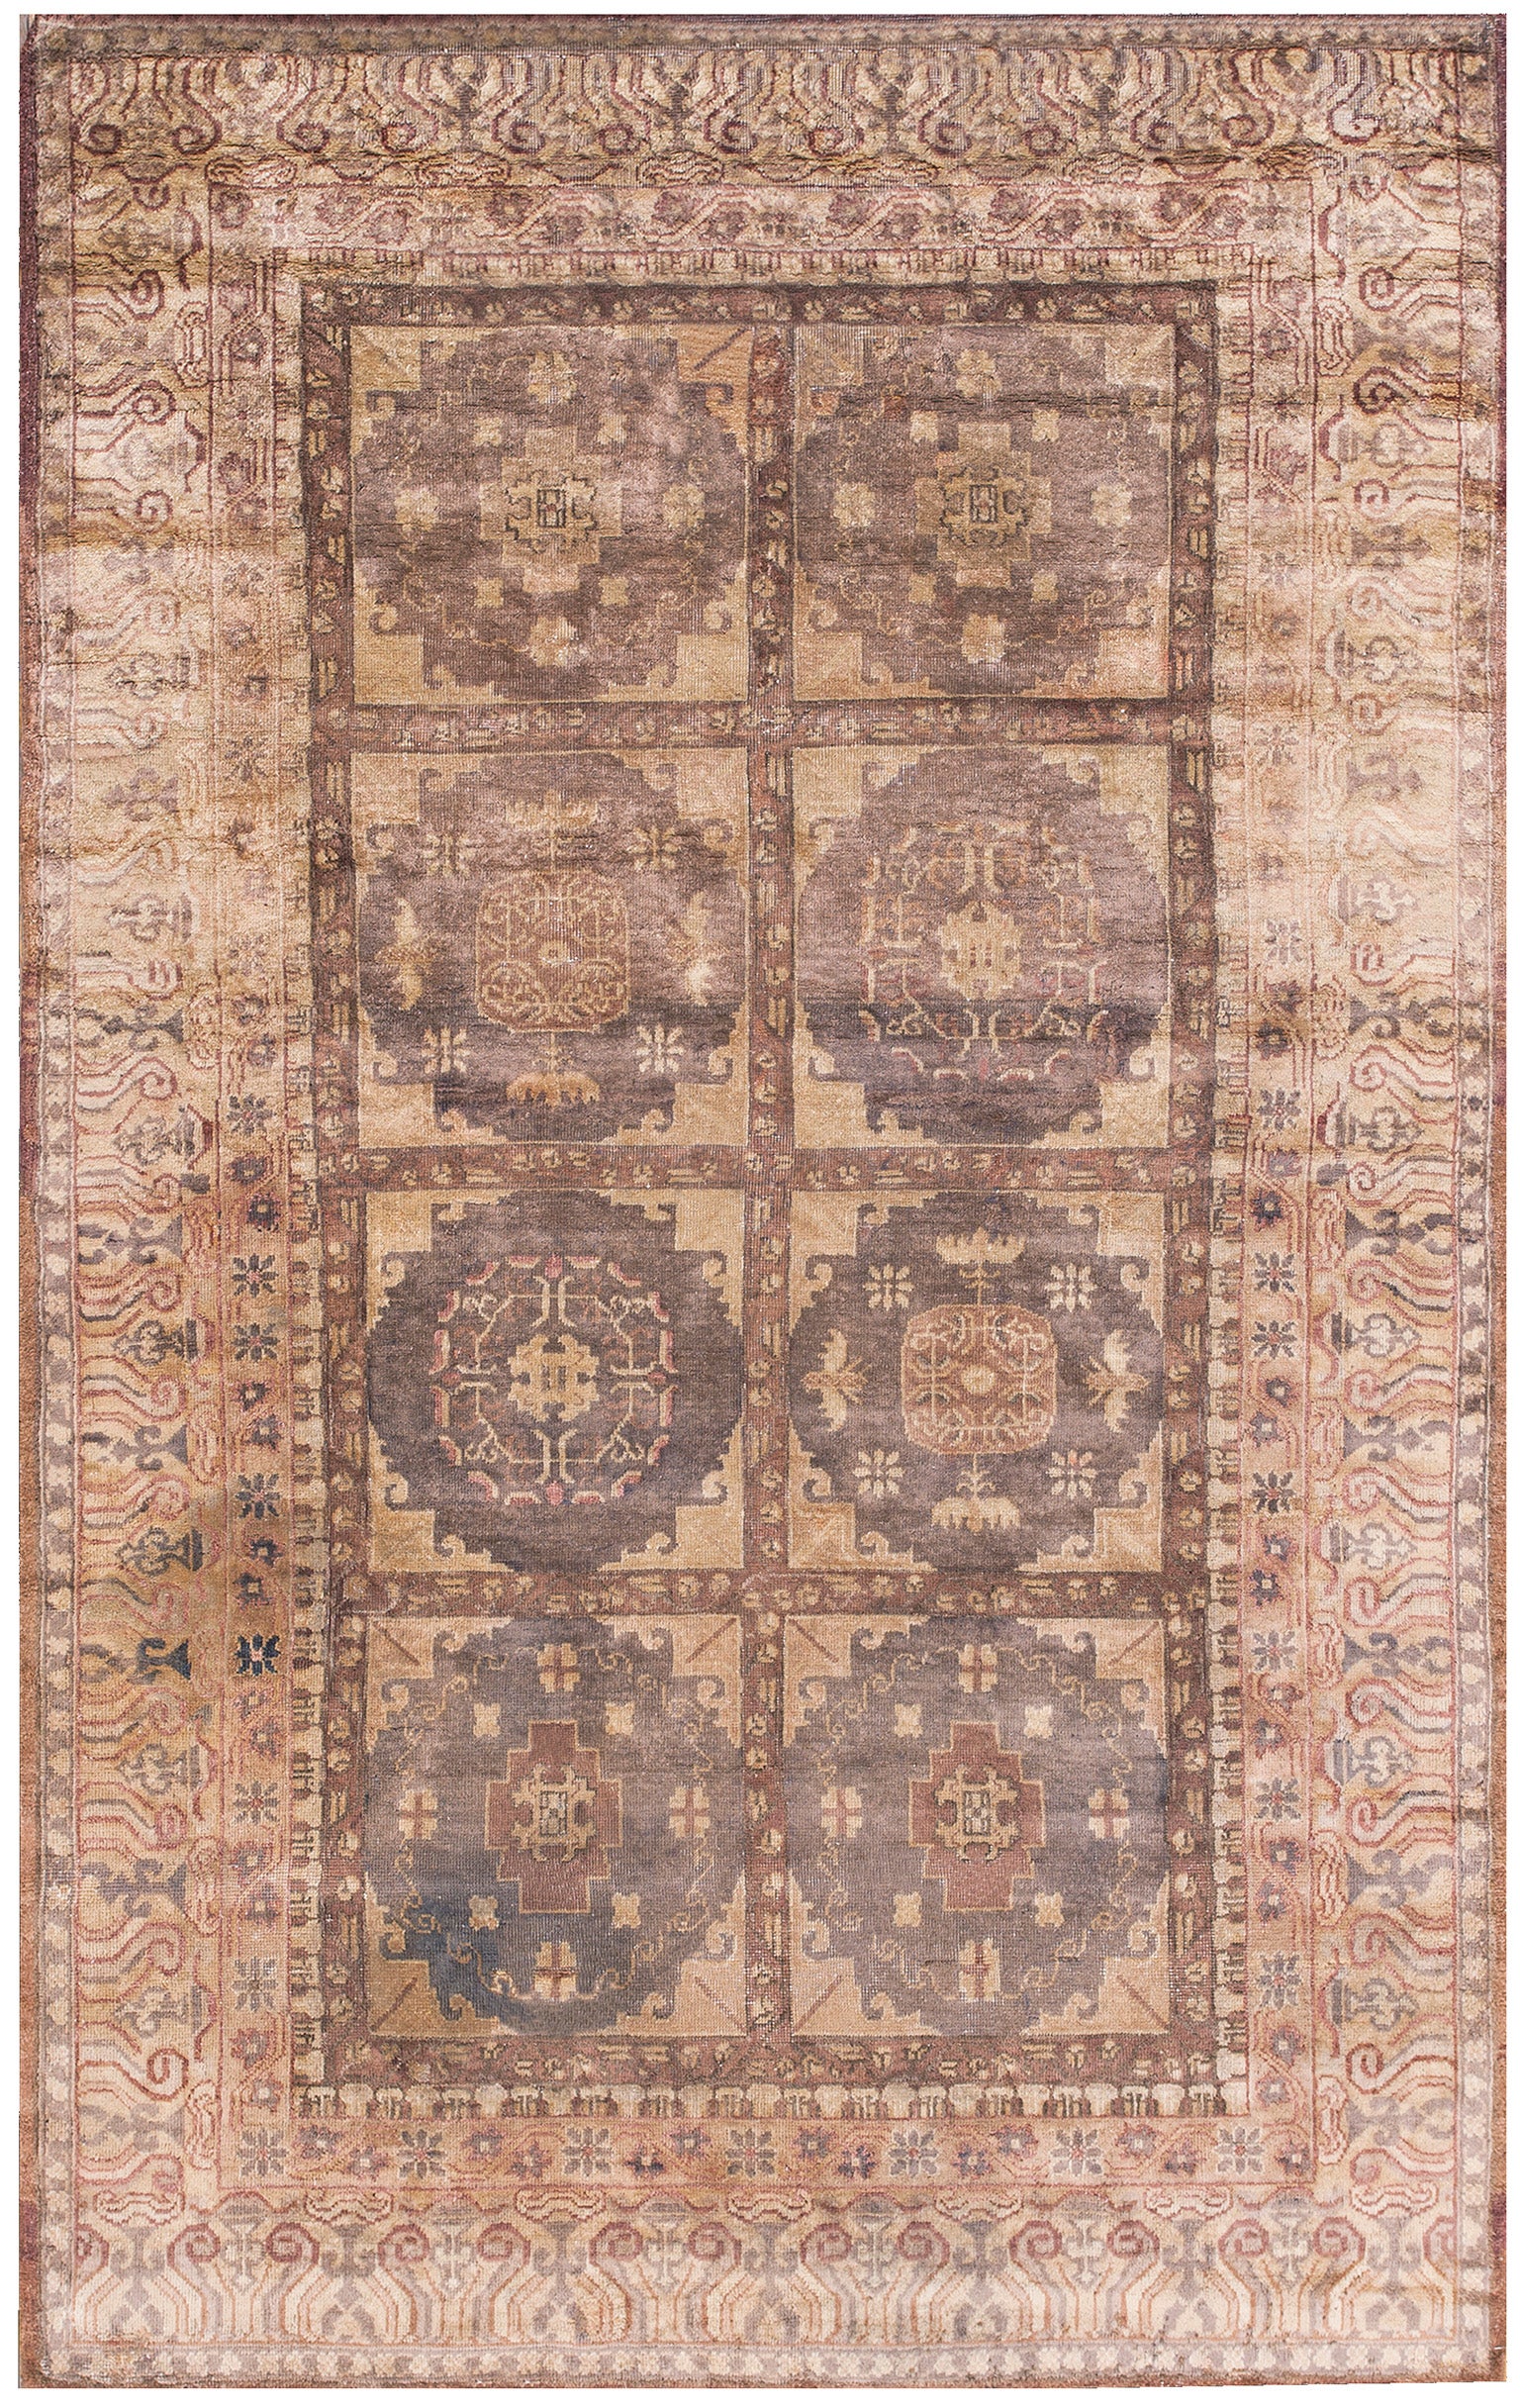 Early 20th Century Central Asian Chinese Khotan Carpet (6'3" x 10' - 191 x 305) For Sale